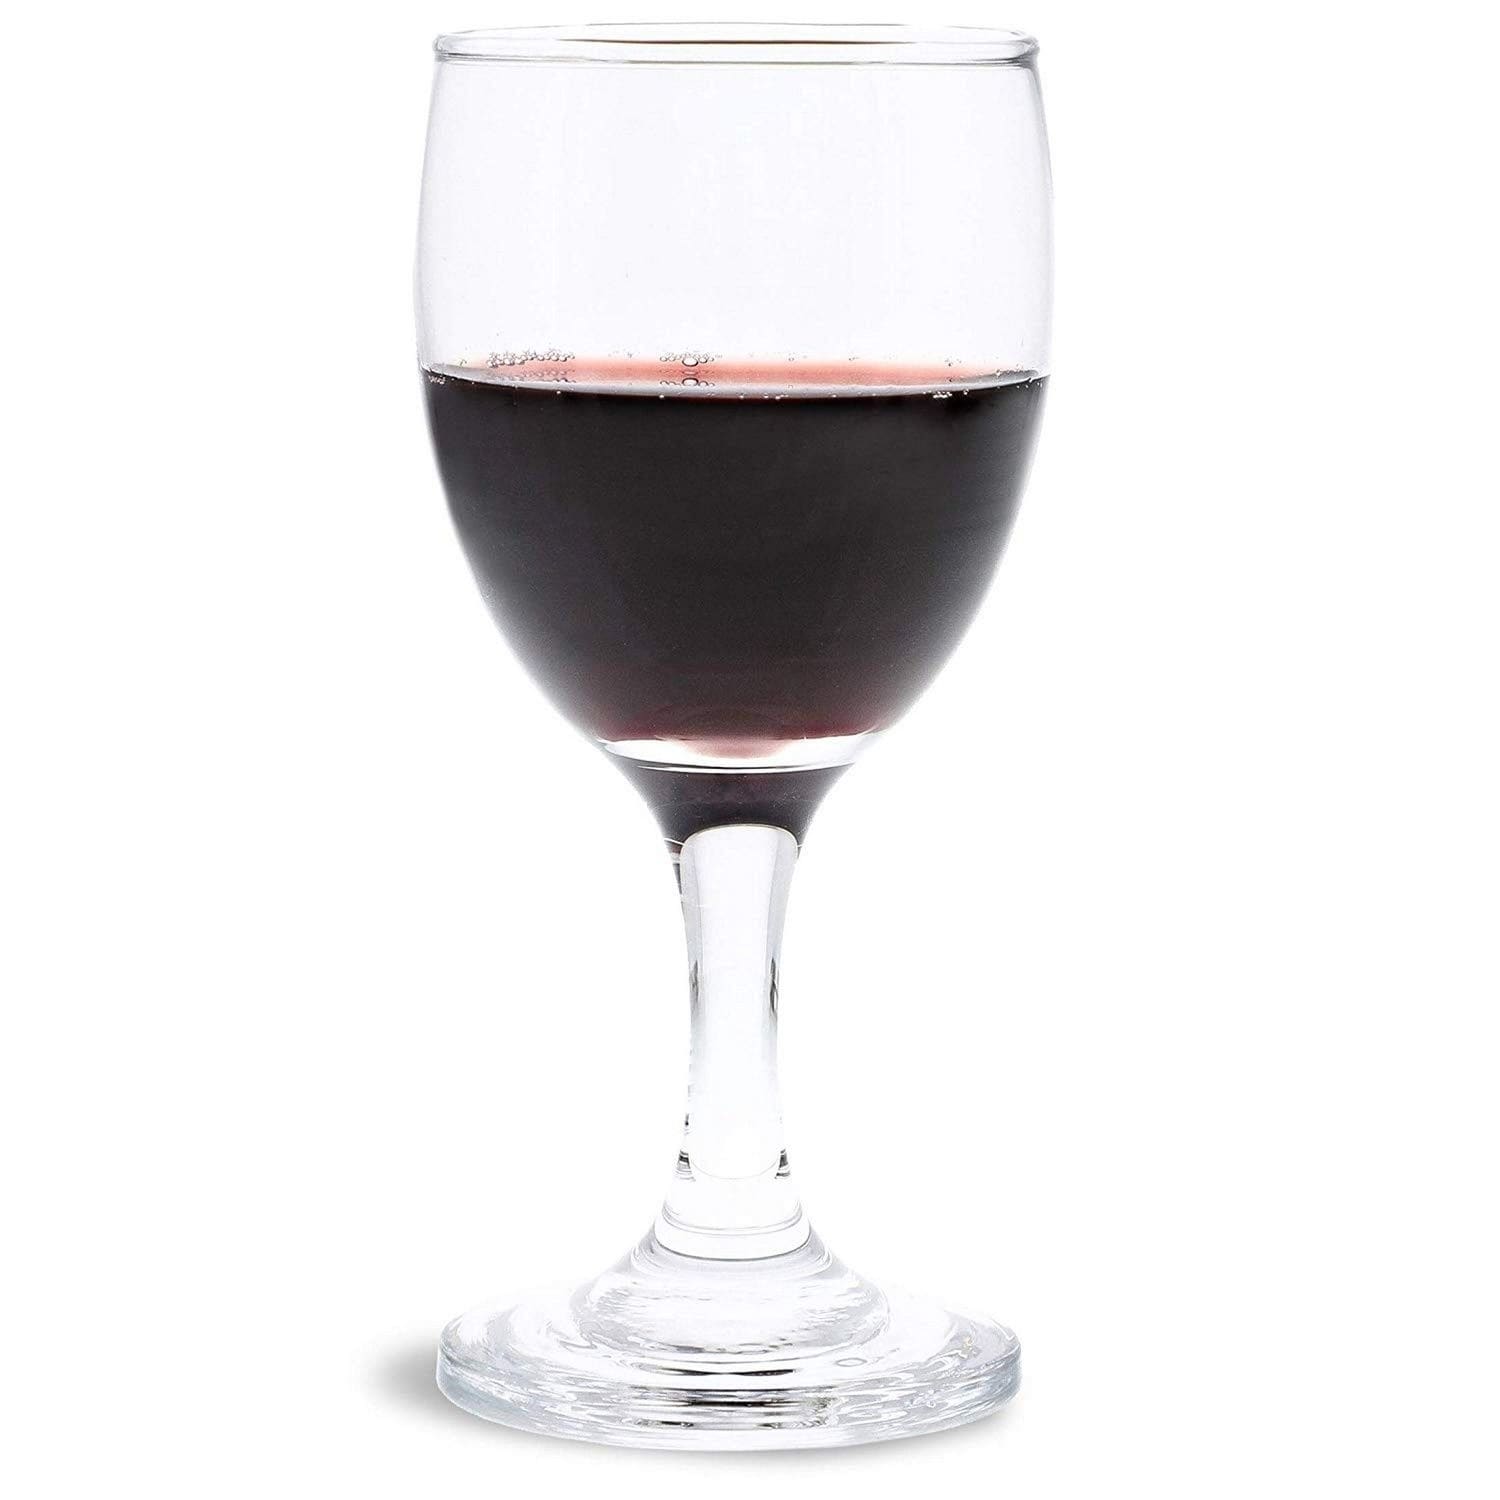 https://ak1.ostkcdn.com/images/products/30100835/Juvale-Set-of-4-Small-Clear-Glass-Stemmed-Wine-Glasses-4.5-Ounces-cd60011d-3f72-4c60-bd92-5a3addbc8f26.jpg